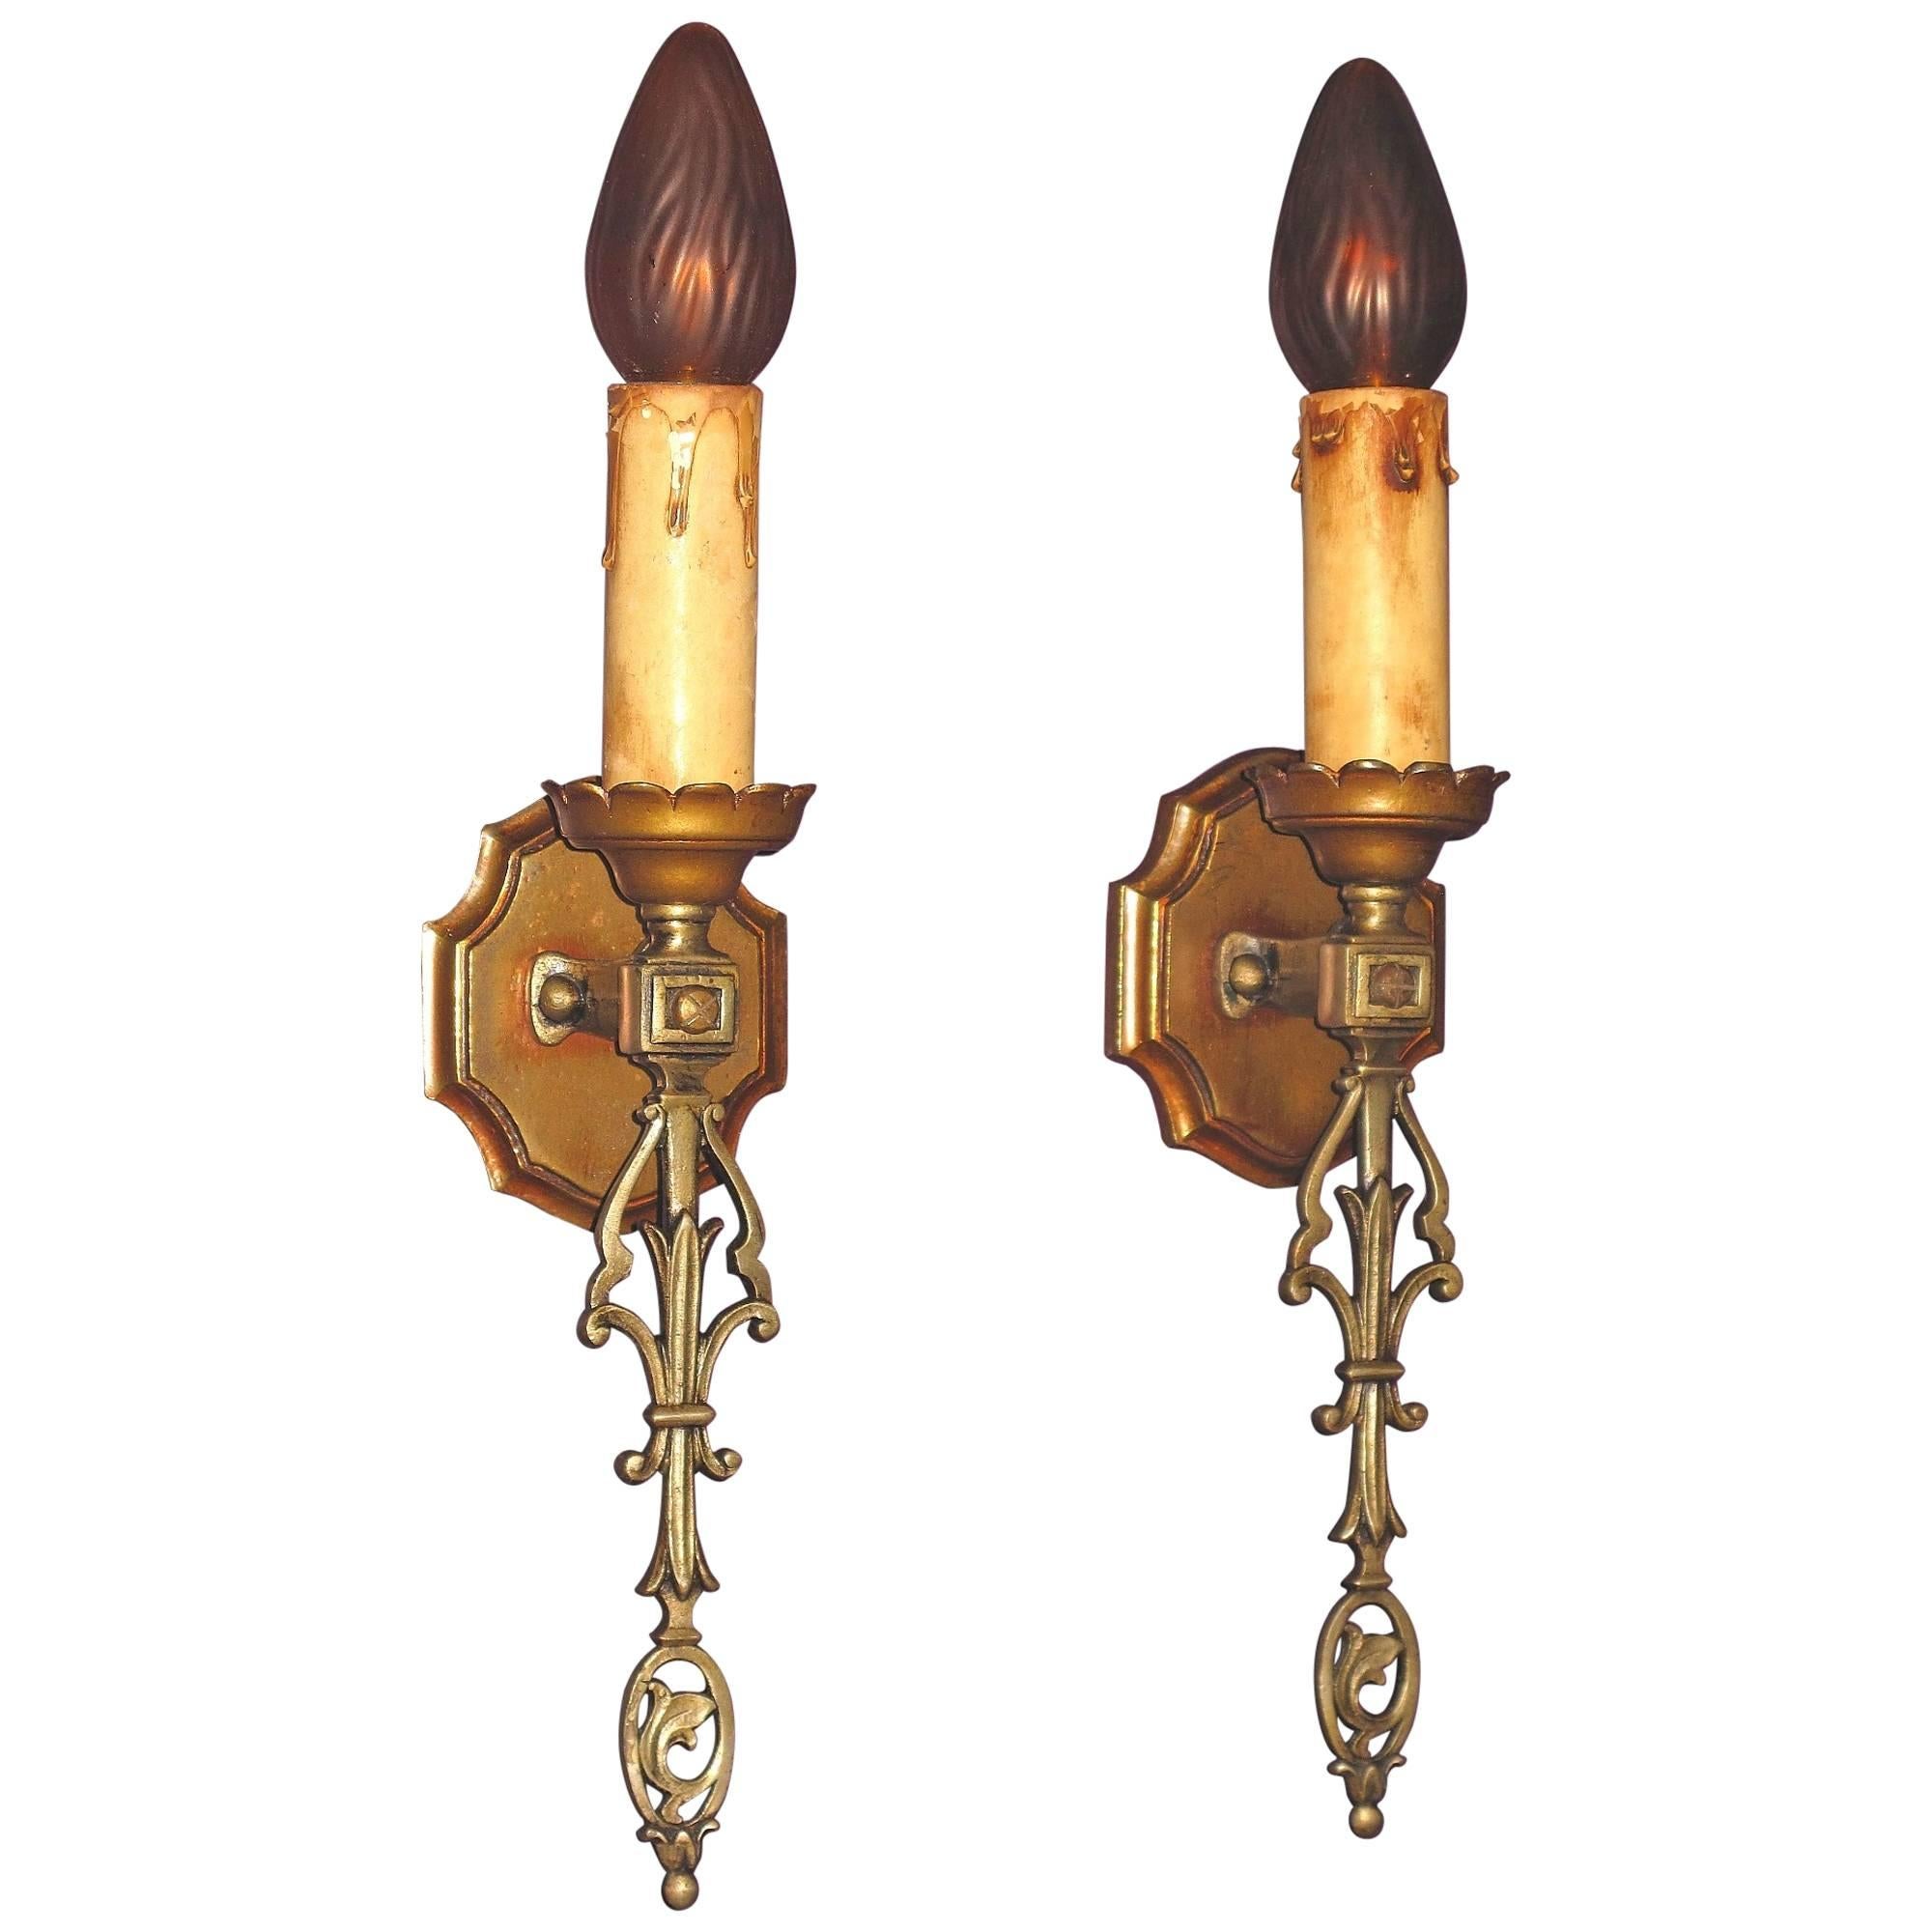 French Eclectic Style Single Bulb Sconces, 1920s For Sale